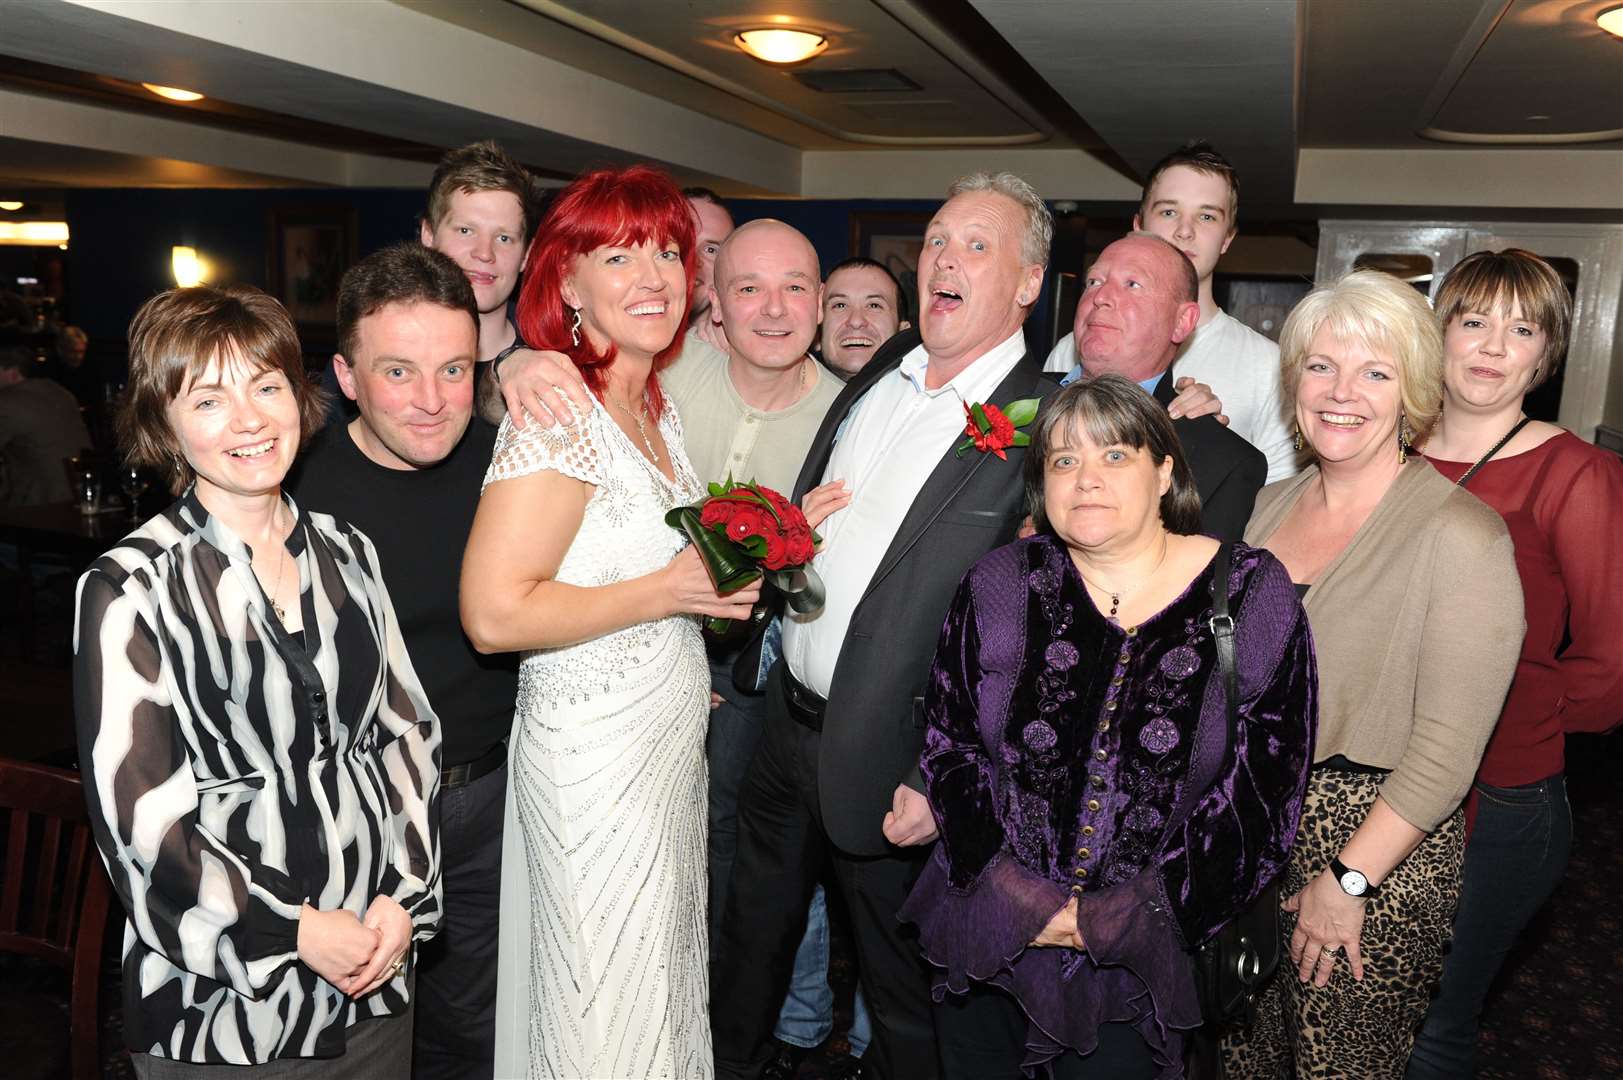 Lilita Vilcina and Paul Williamson (centre) celebrate there wedding with friends and family in Wetherspoons.